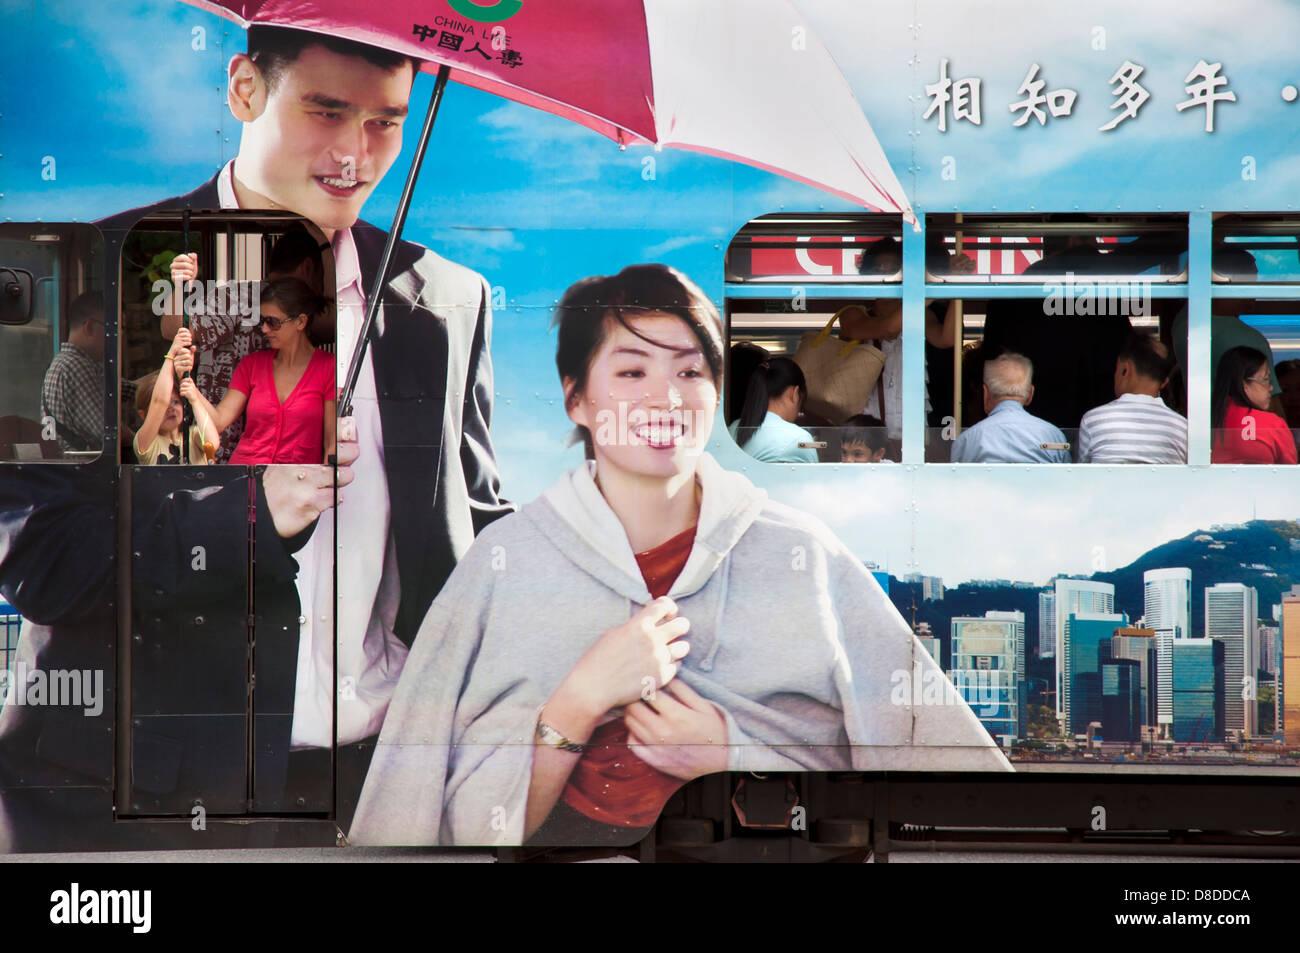 Chinese basketball star Yao Ming on the side of one of Hong Kong's famous city trams Stock Photo